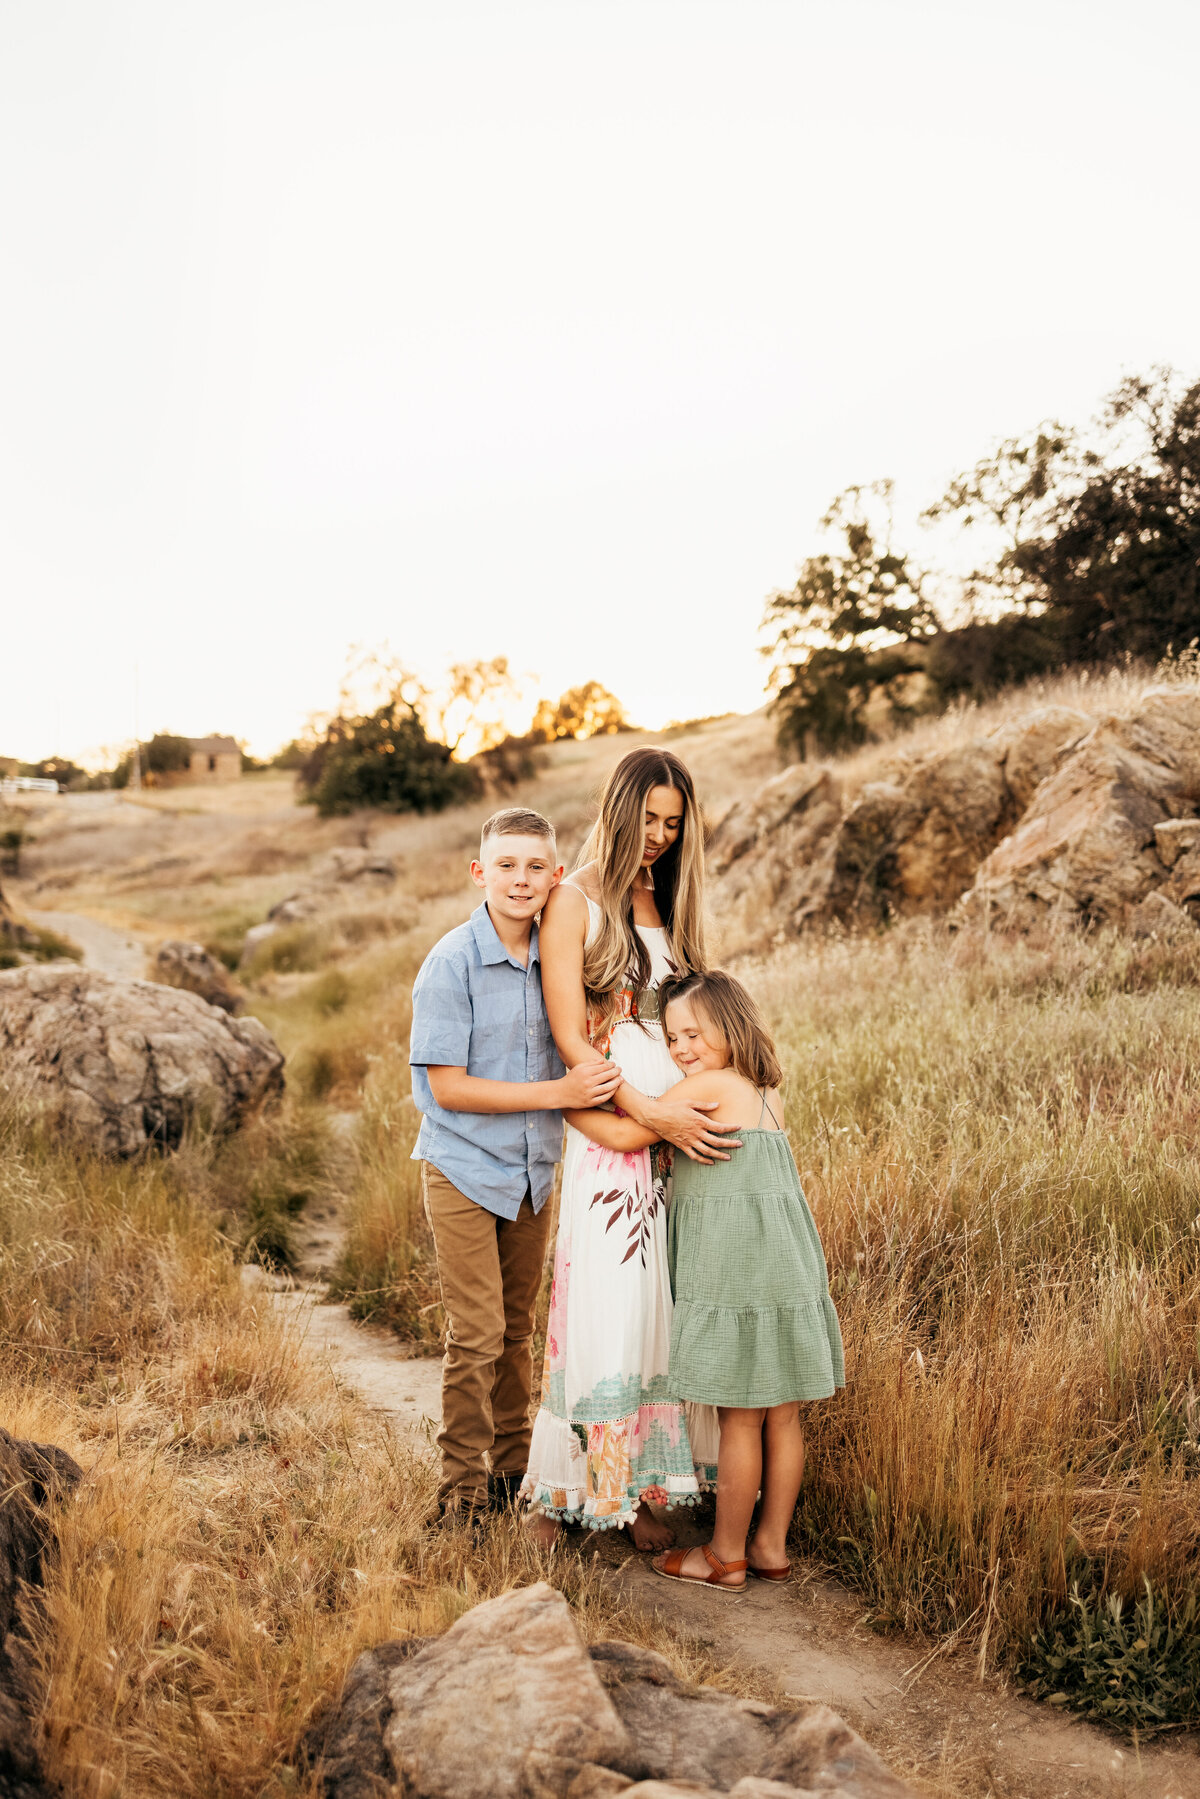 Sonora California is my favorite place to do my photography work. Jolee specializes in family photography and wedding photography